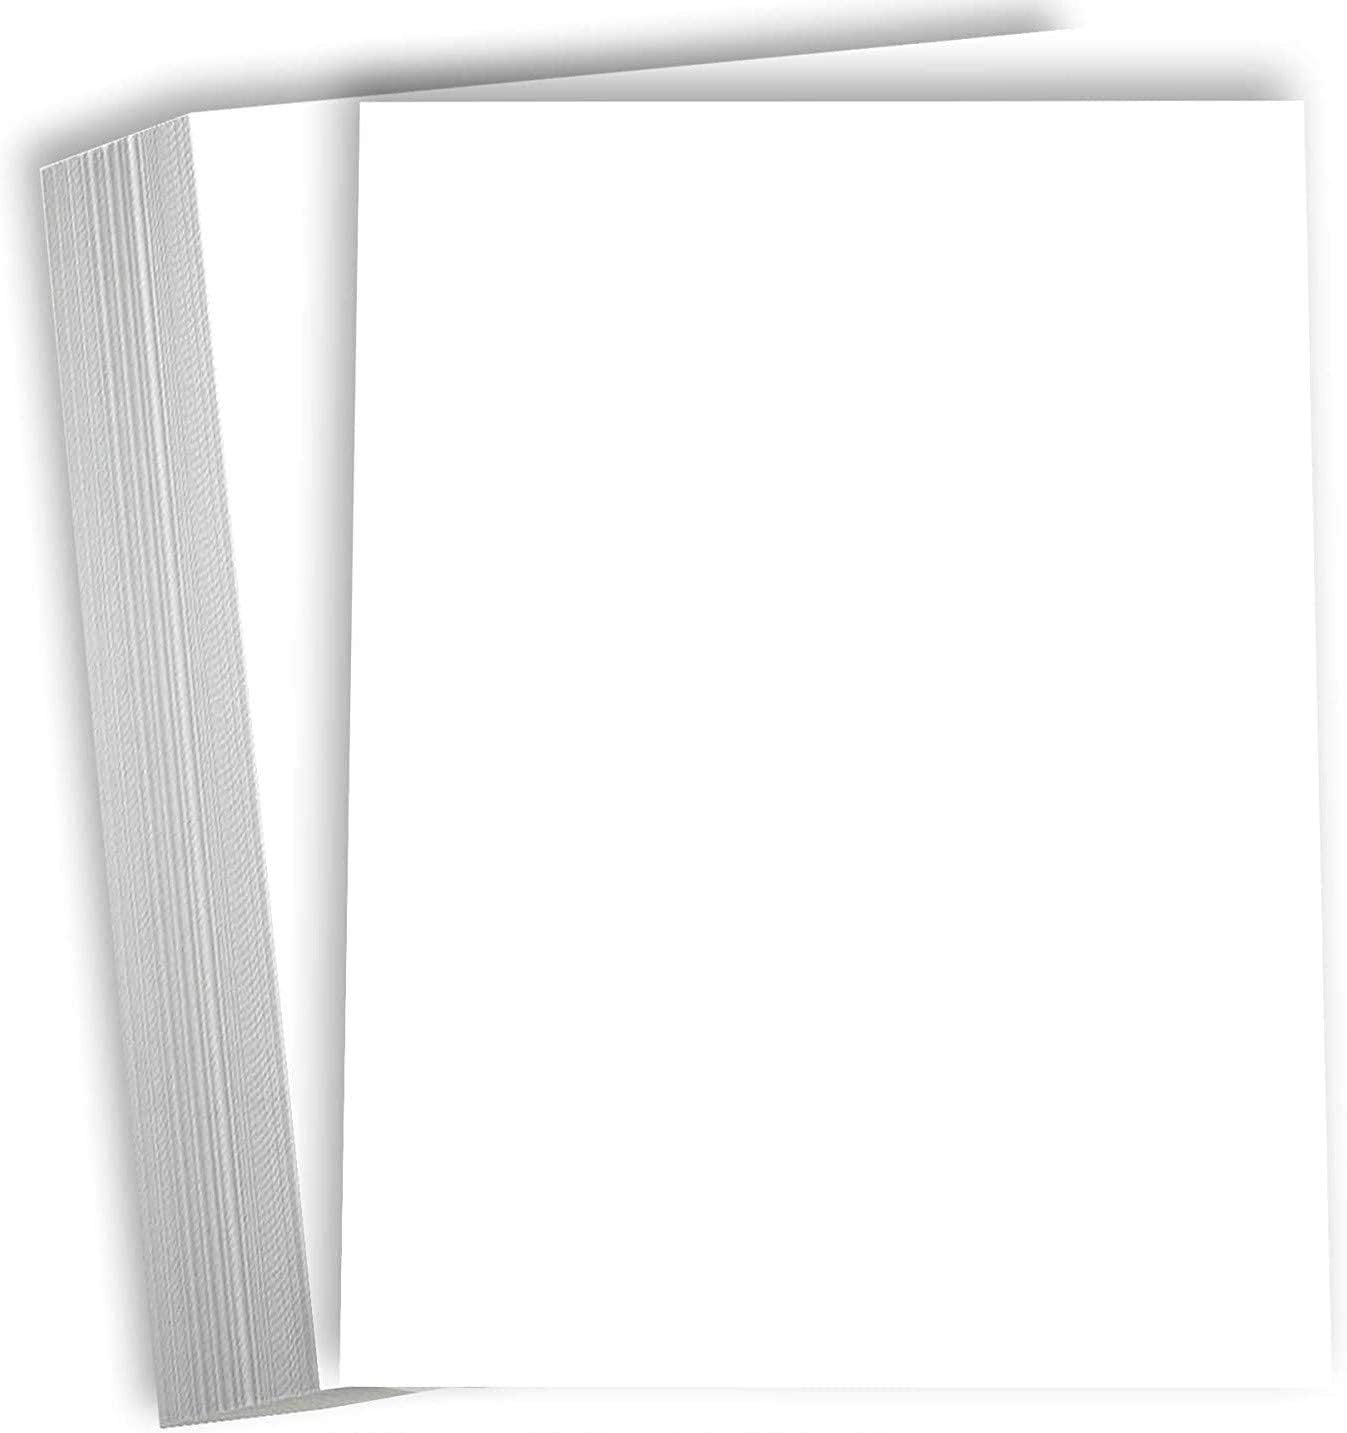 Hamilco Card Stock Folded Blank Cards 5 1/2 x 8 1/2 - Scored White  Cardstock Paper 80lb Cover - 100 Pack